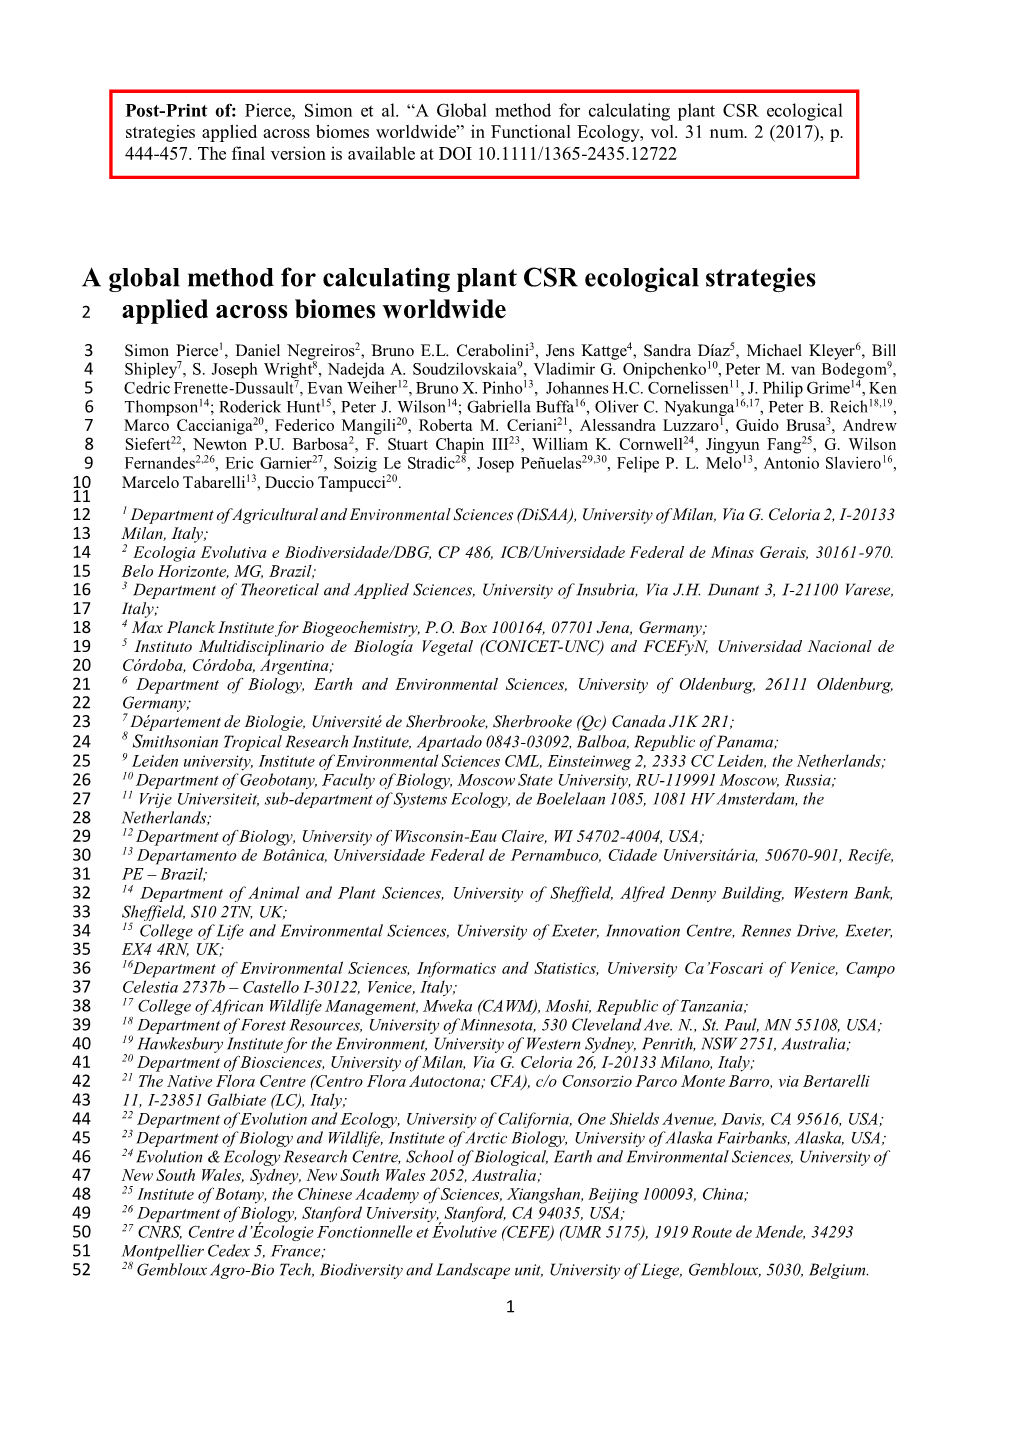 A Global Method for Calculating Plant CSR Ecological Strategies Applied Across Biomes Worldwide” in Functional Ecology, Vol